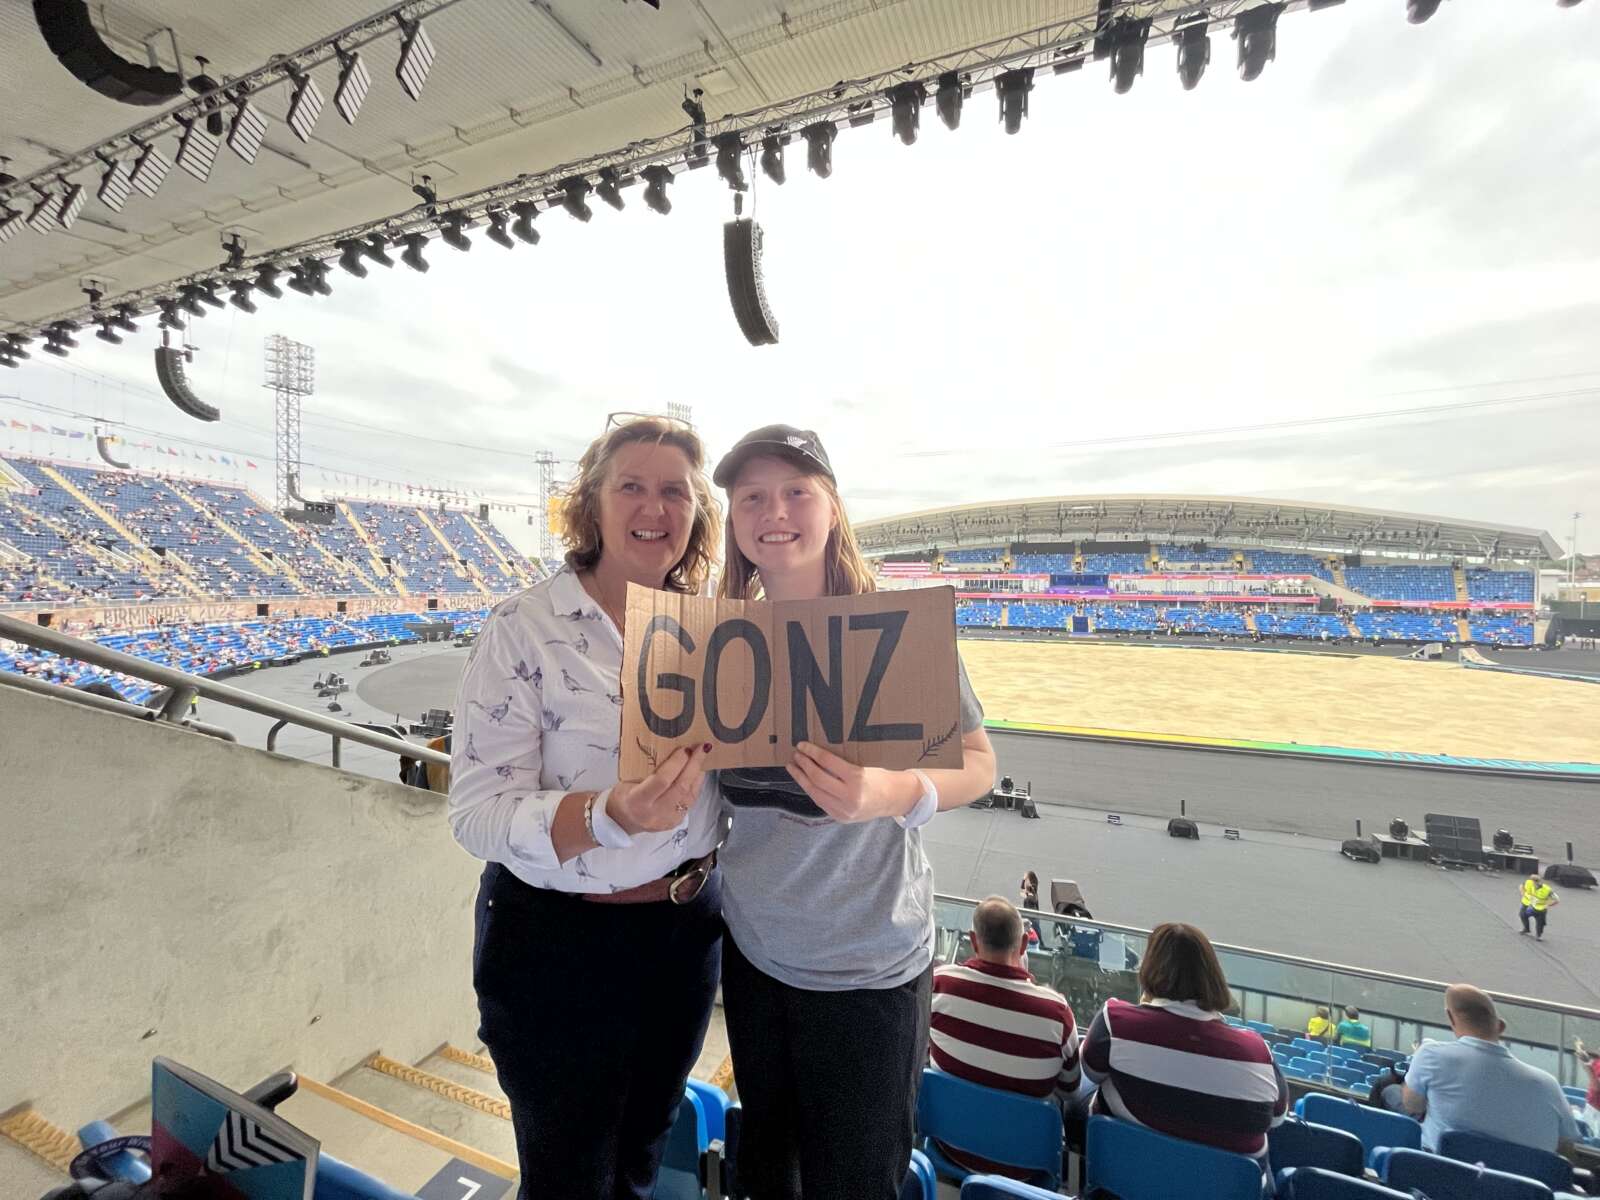 Victoria attending the Commonwealth games with a family member. Both are standing inside the stadium looking at the camera with the arena behind them holding a sign saying 'Go NZ'